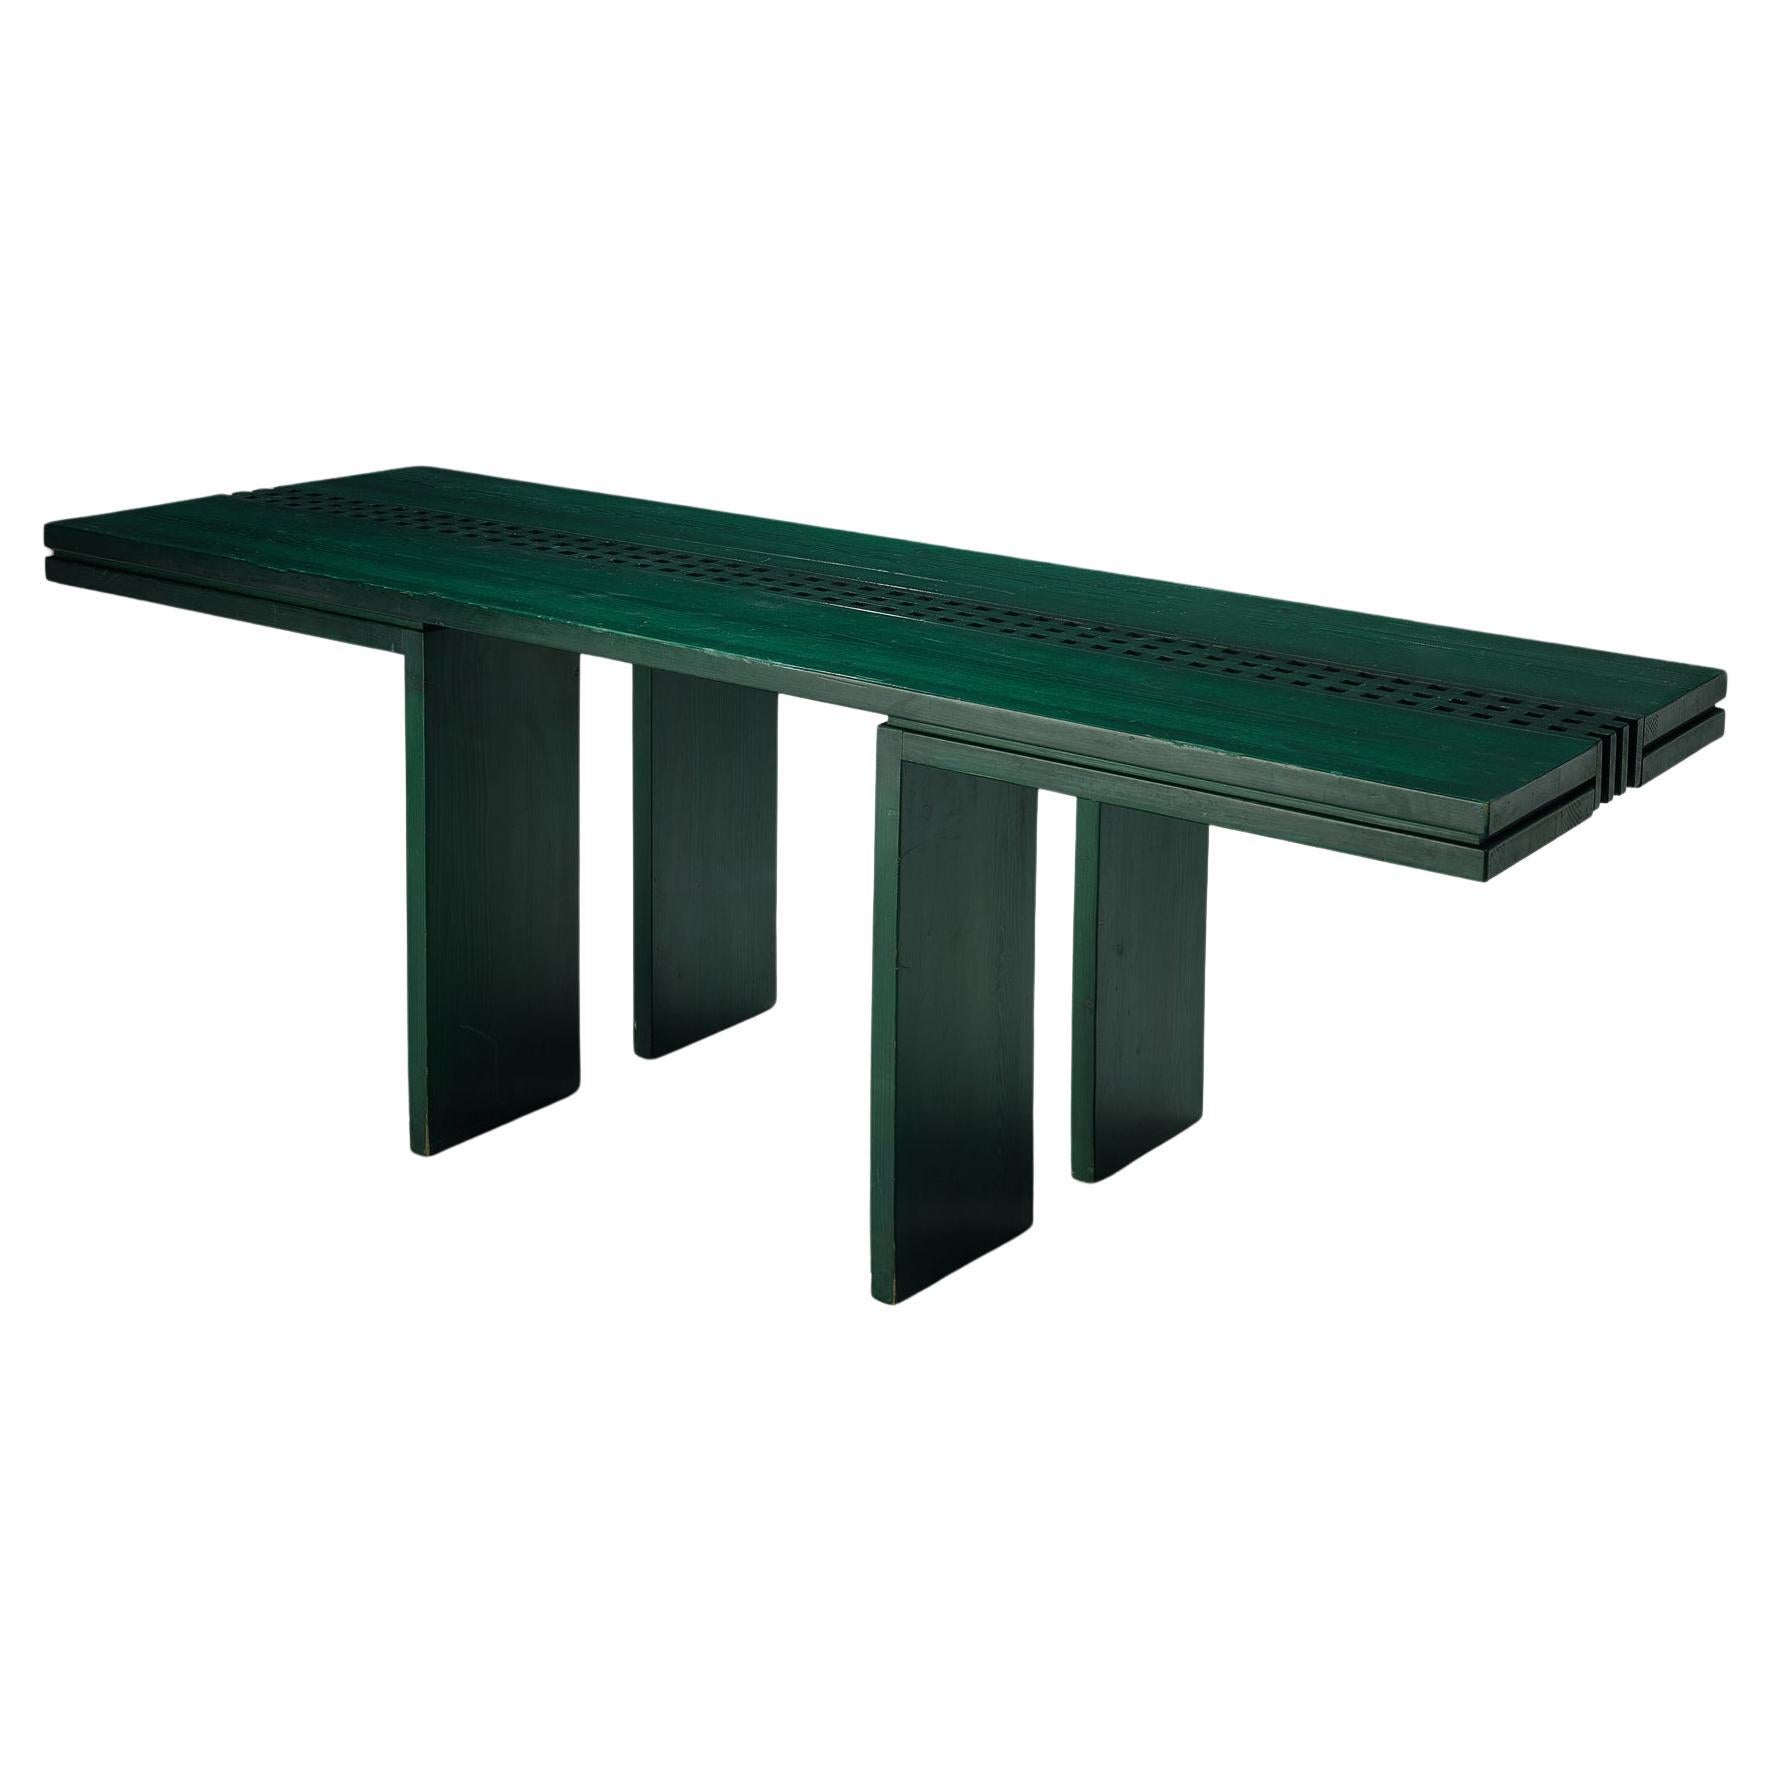 Italian Dining Table in Green Stained Pine 